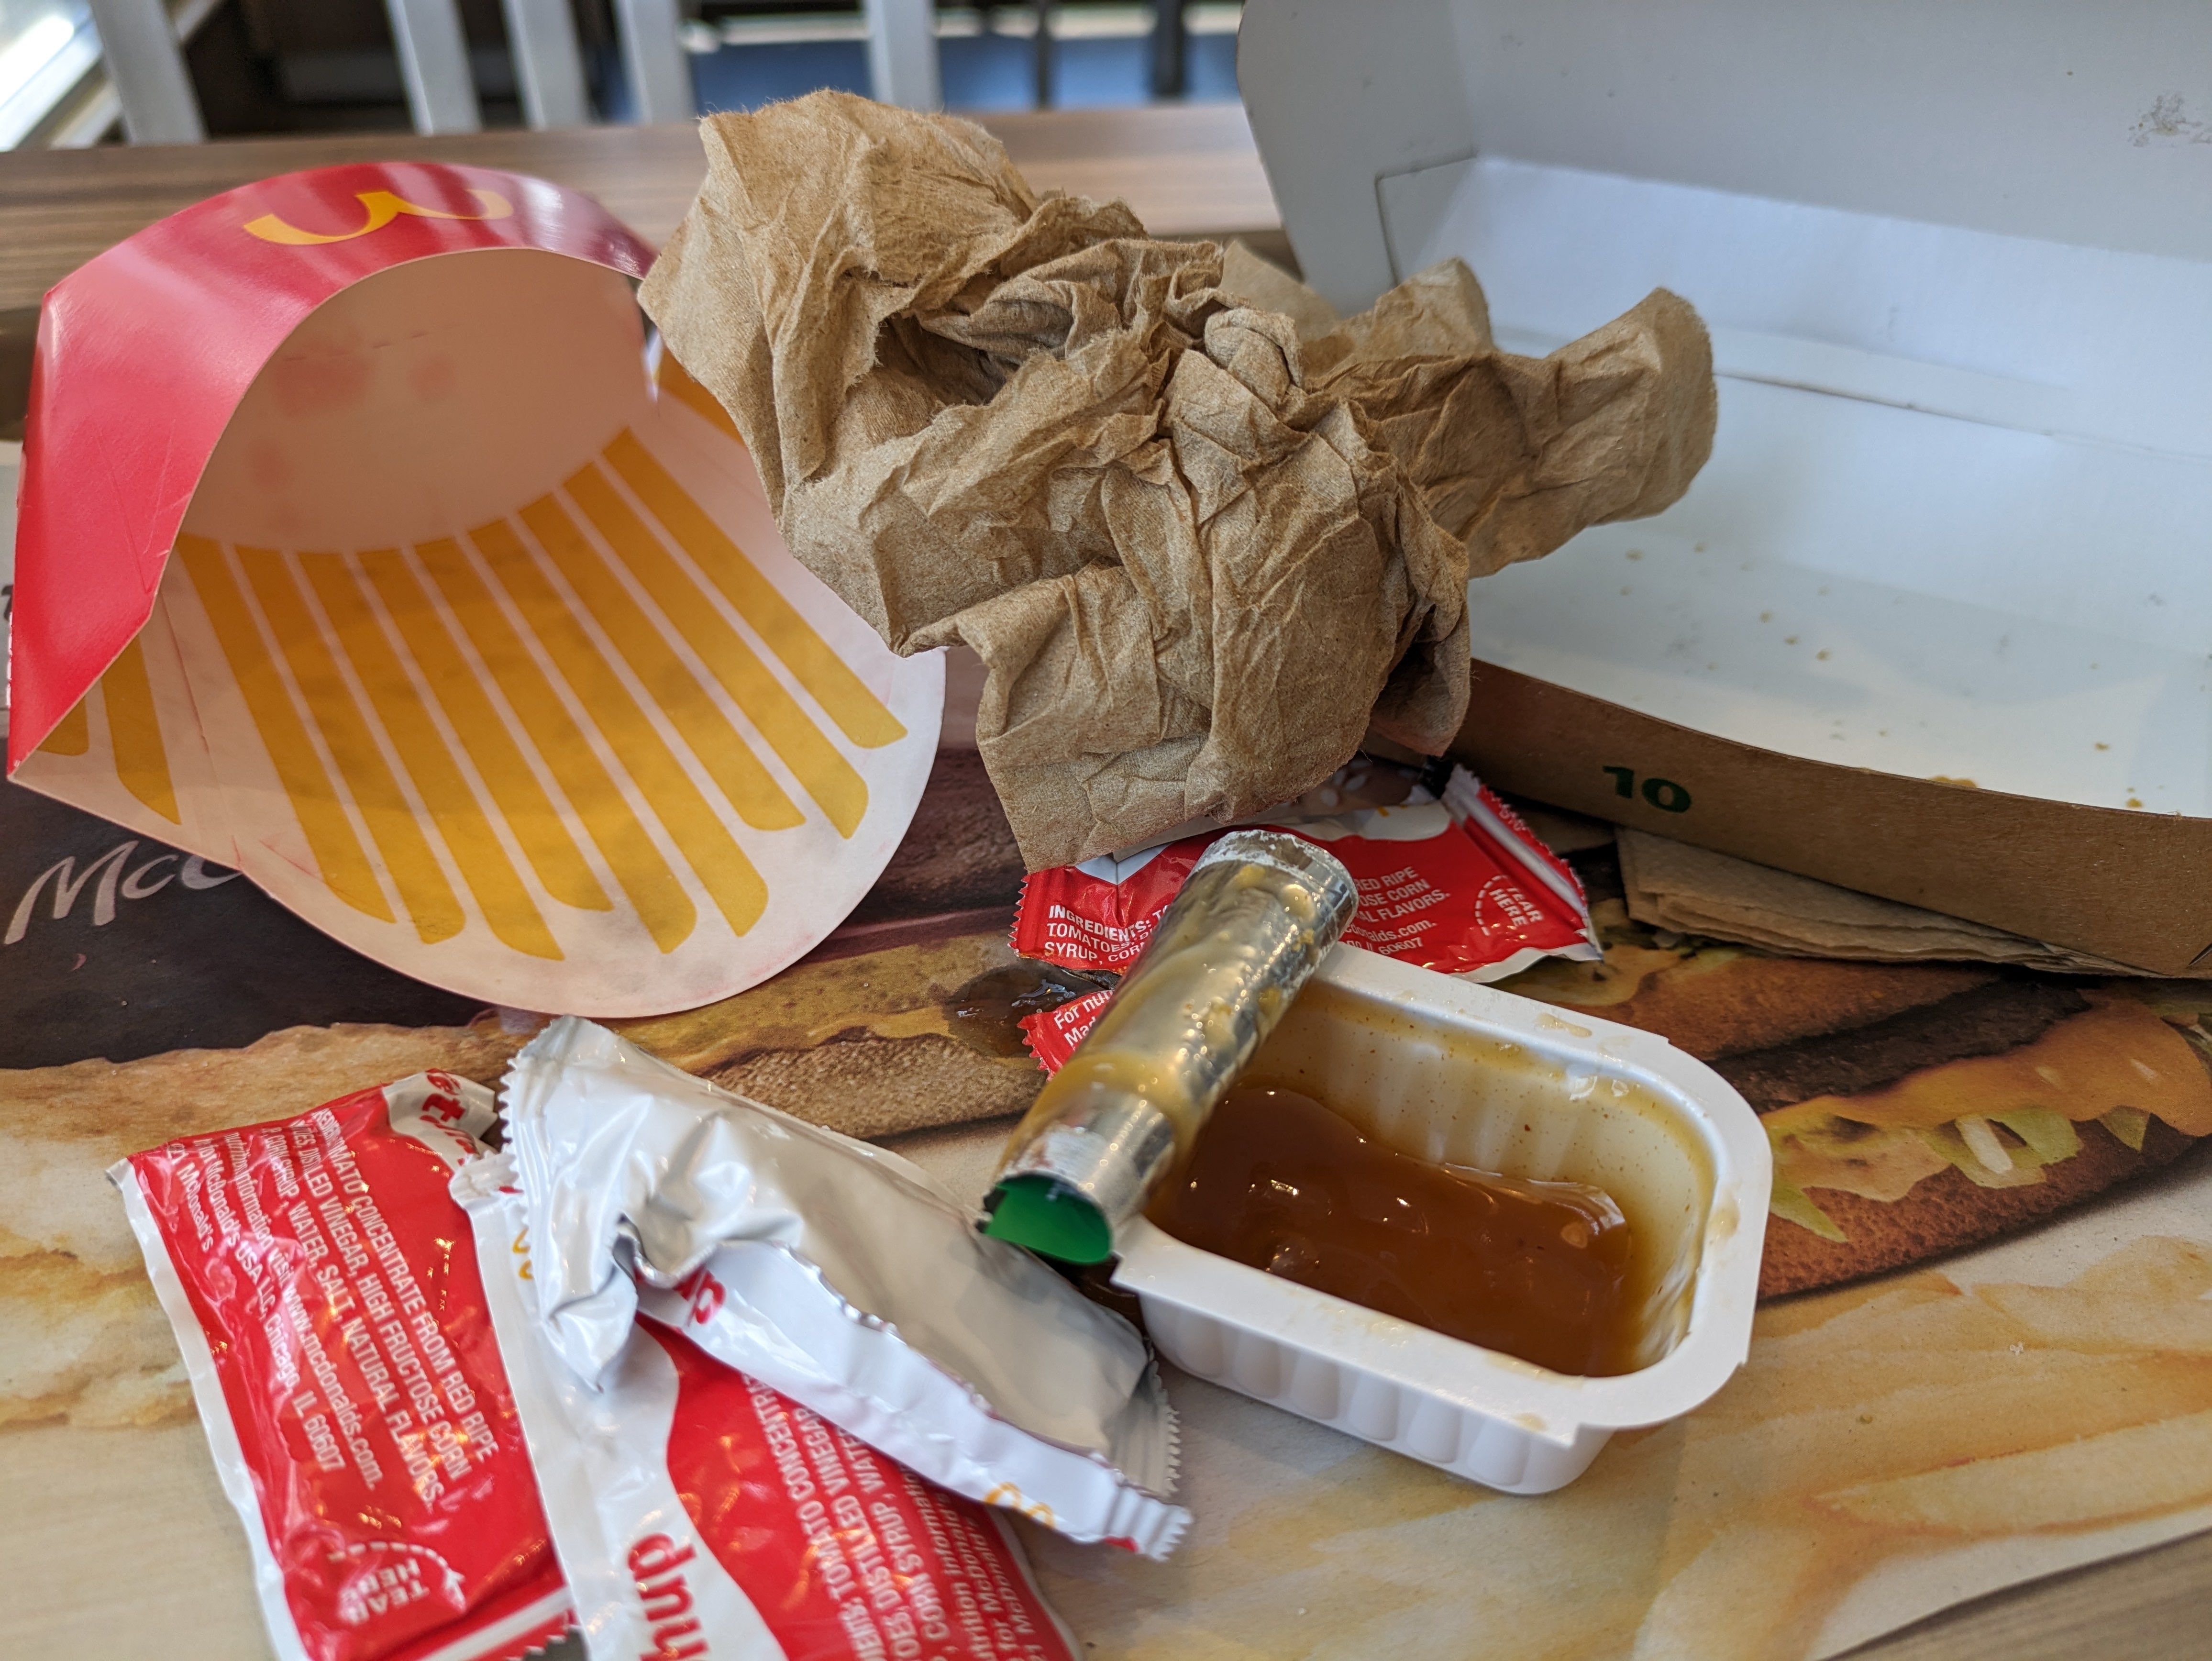 Photograph of a finished McDonald's meal